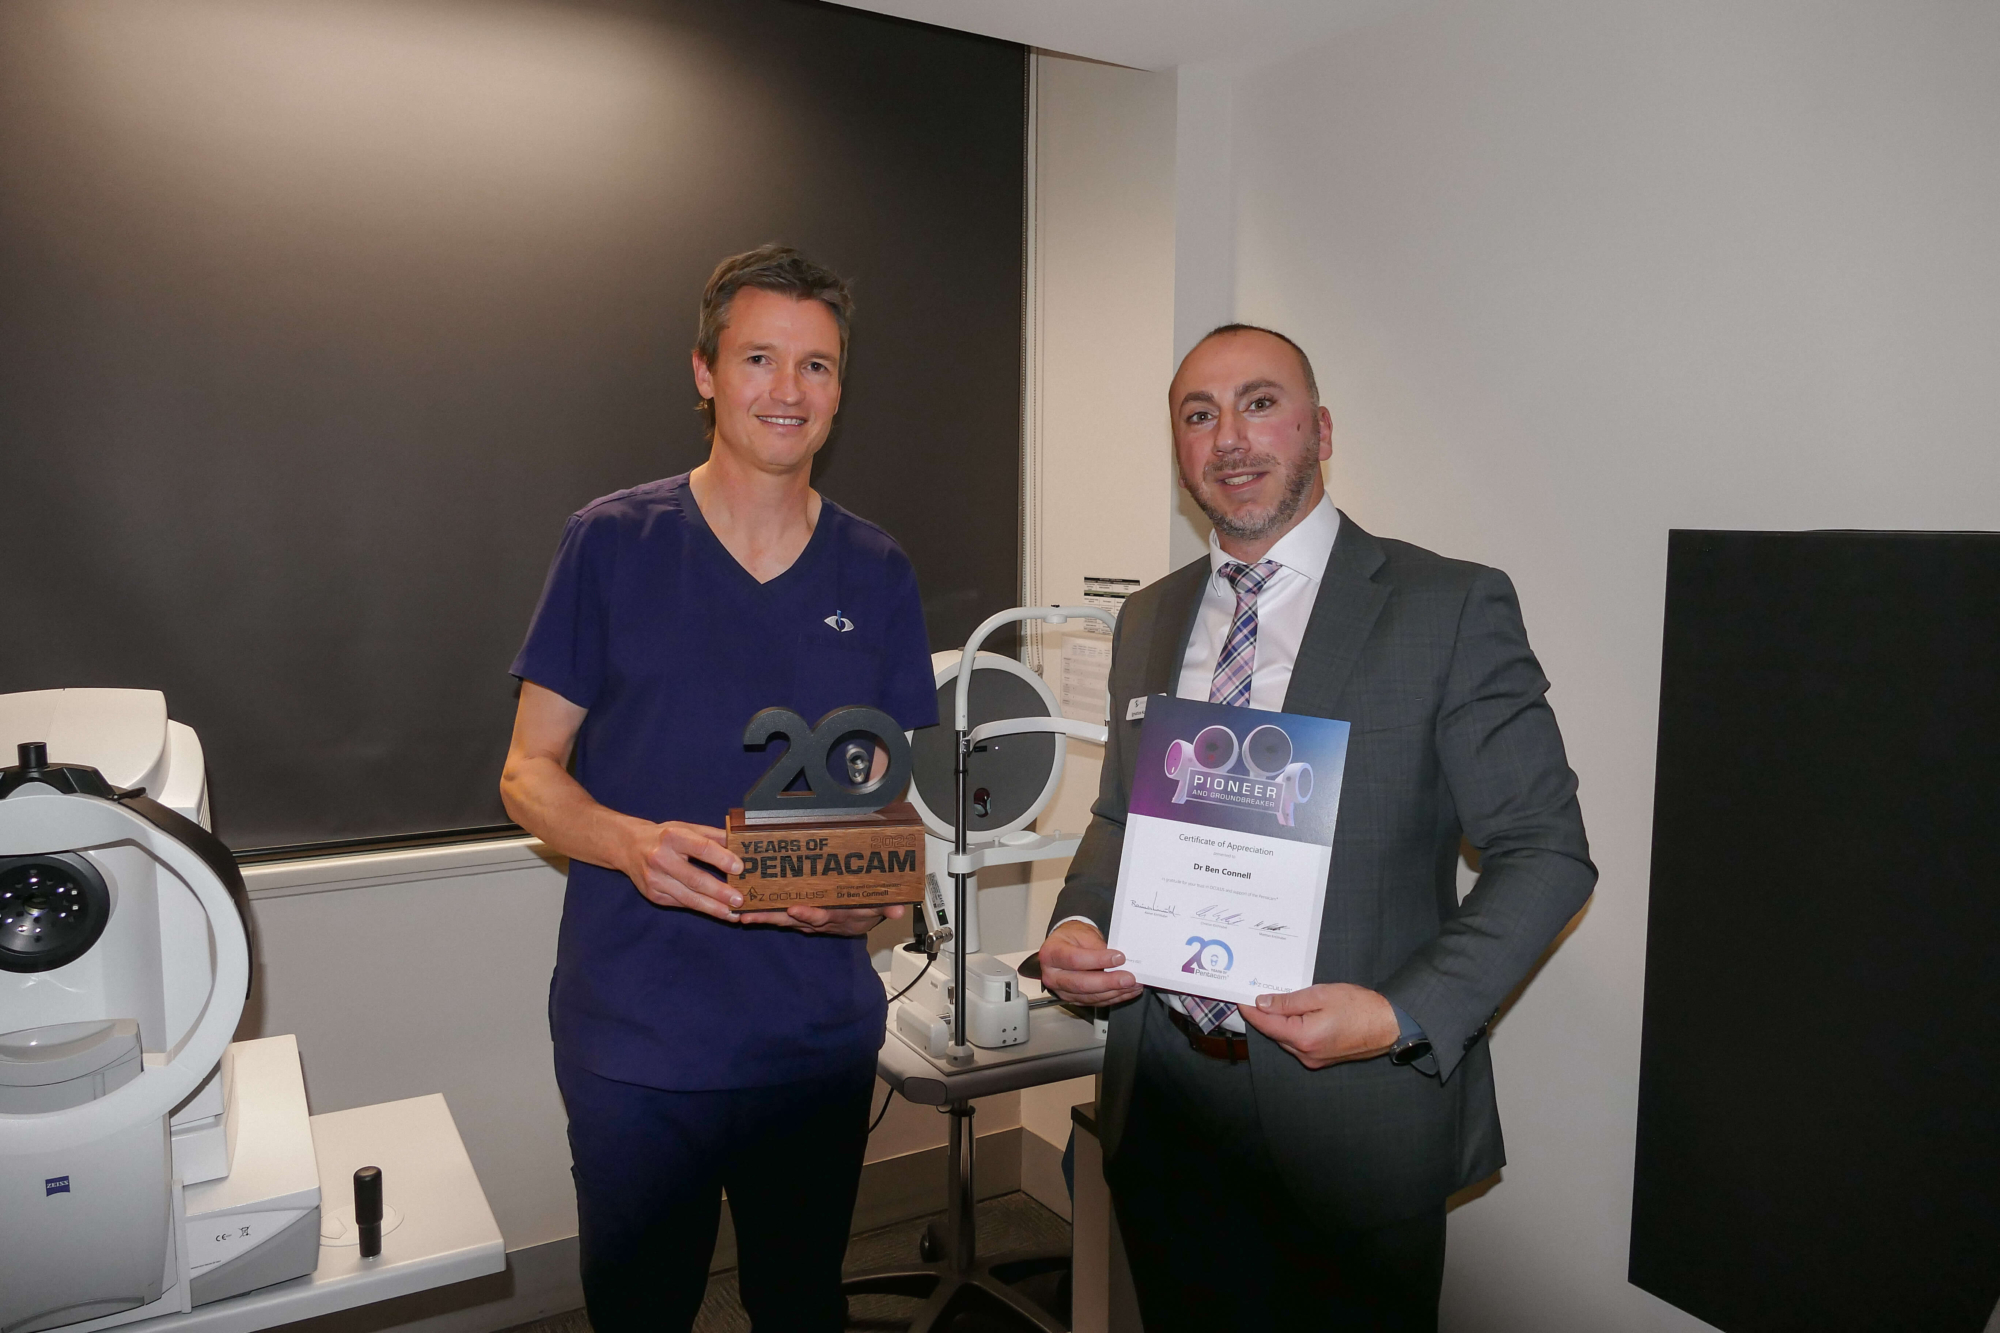 Dr. Ben Connell receives the 20th Anniversary Pentacam® Trophy Certificate of Appreciation